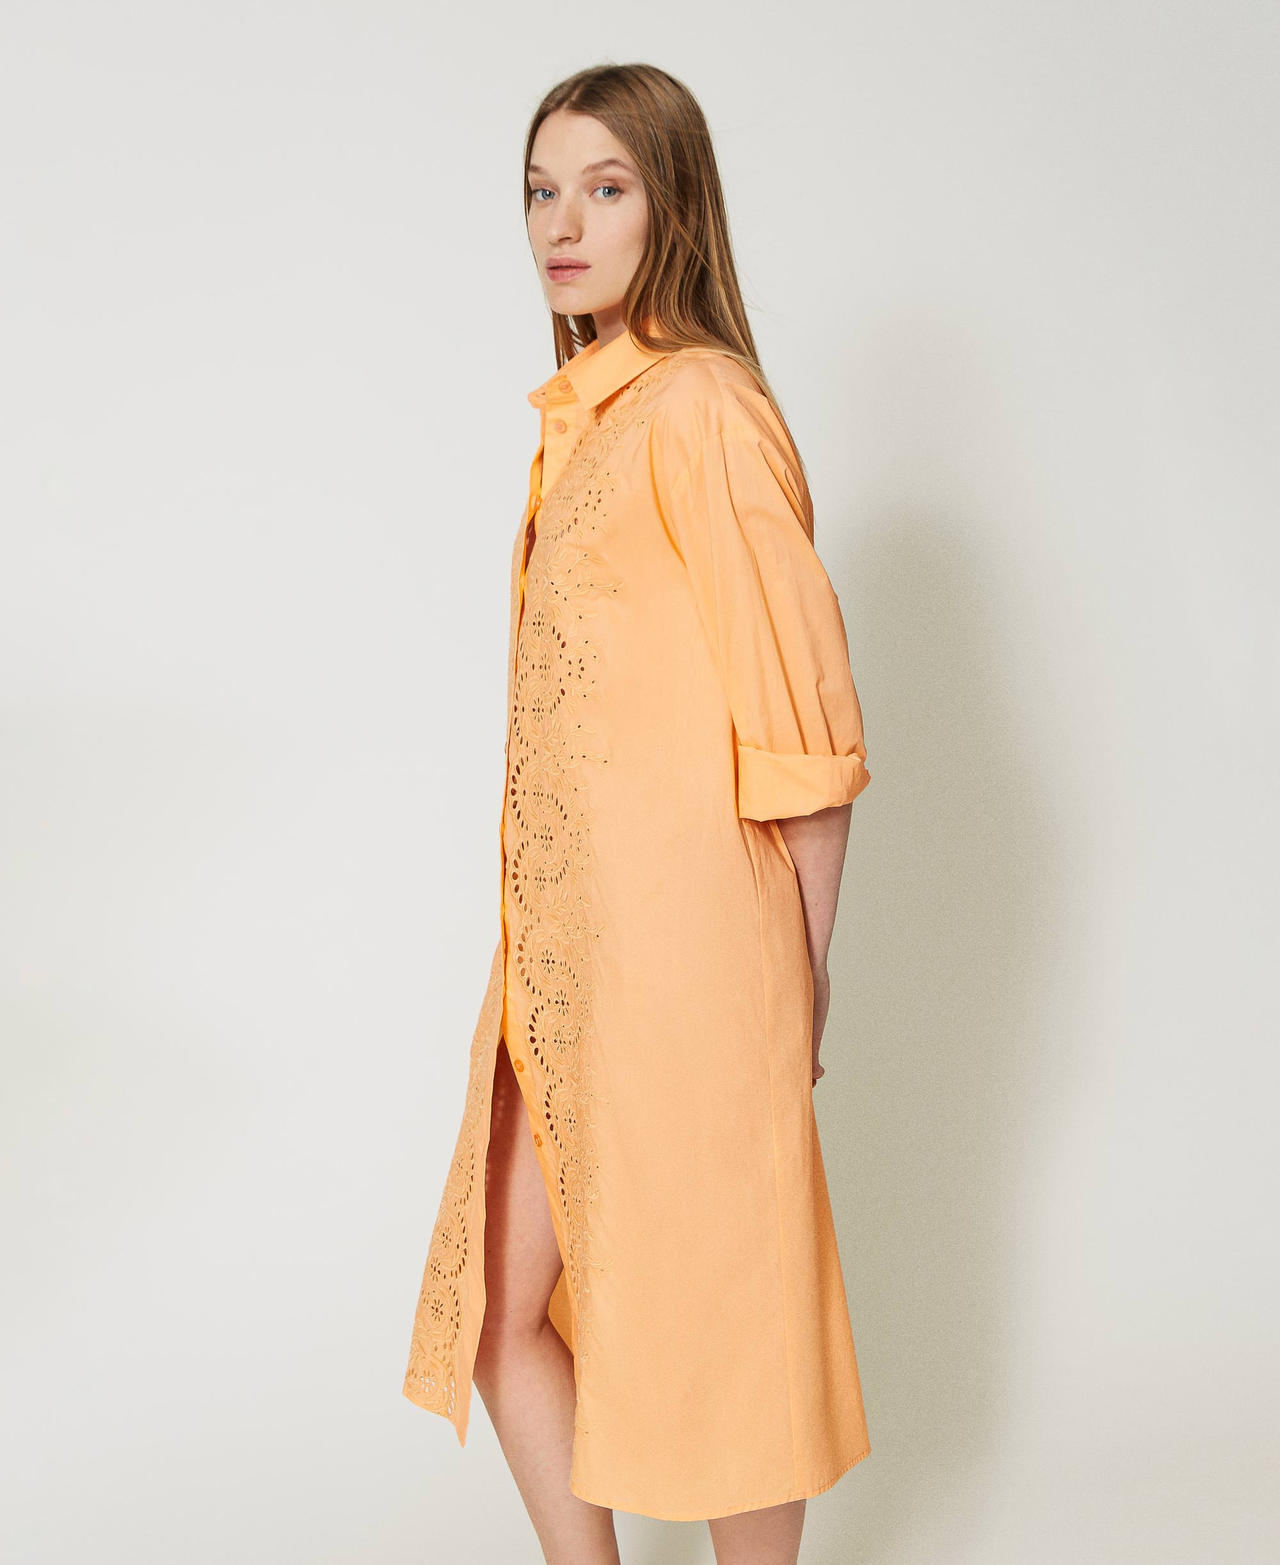 Midi shirt dress with broderie anglaise "Cantaloupe” Orange Woman 231LM2RBB-03